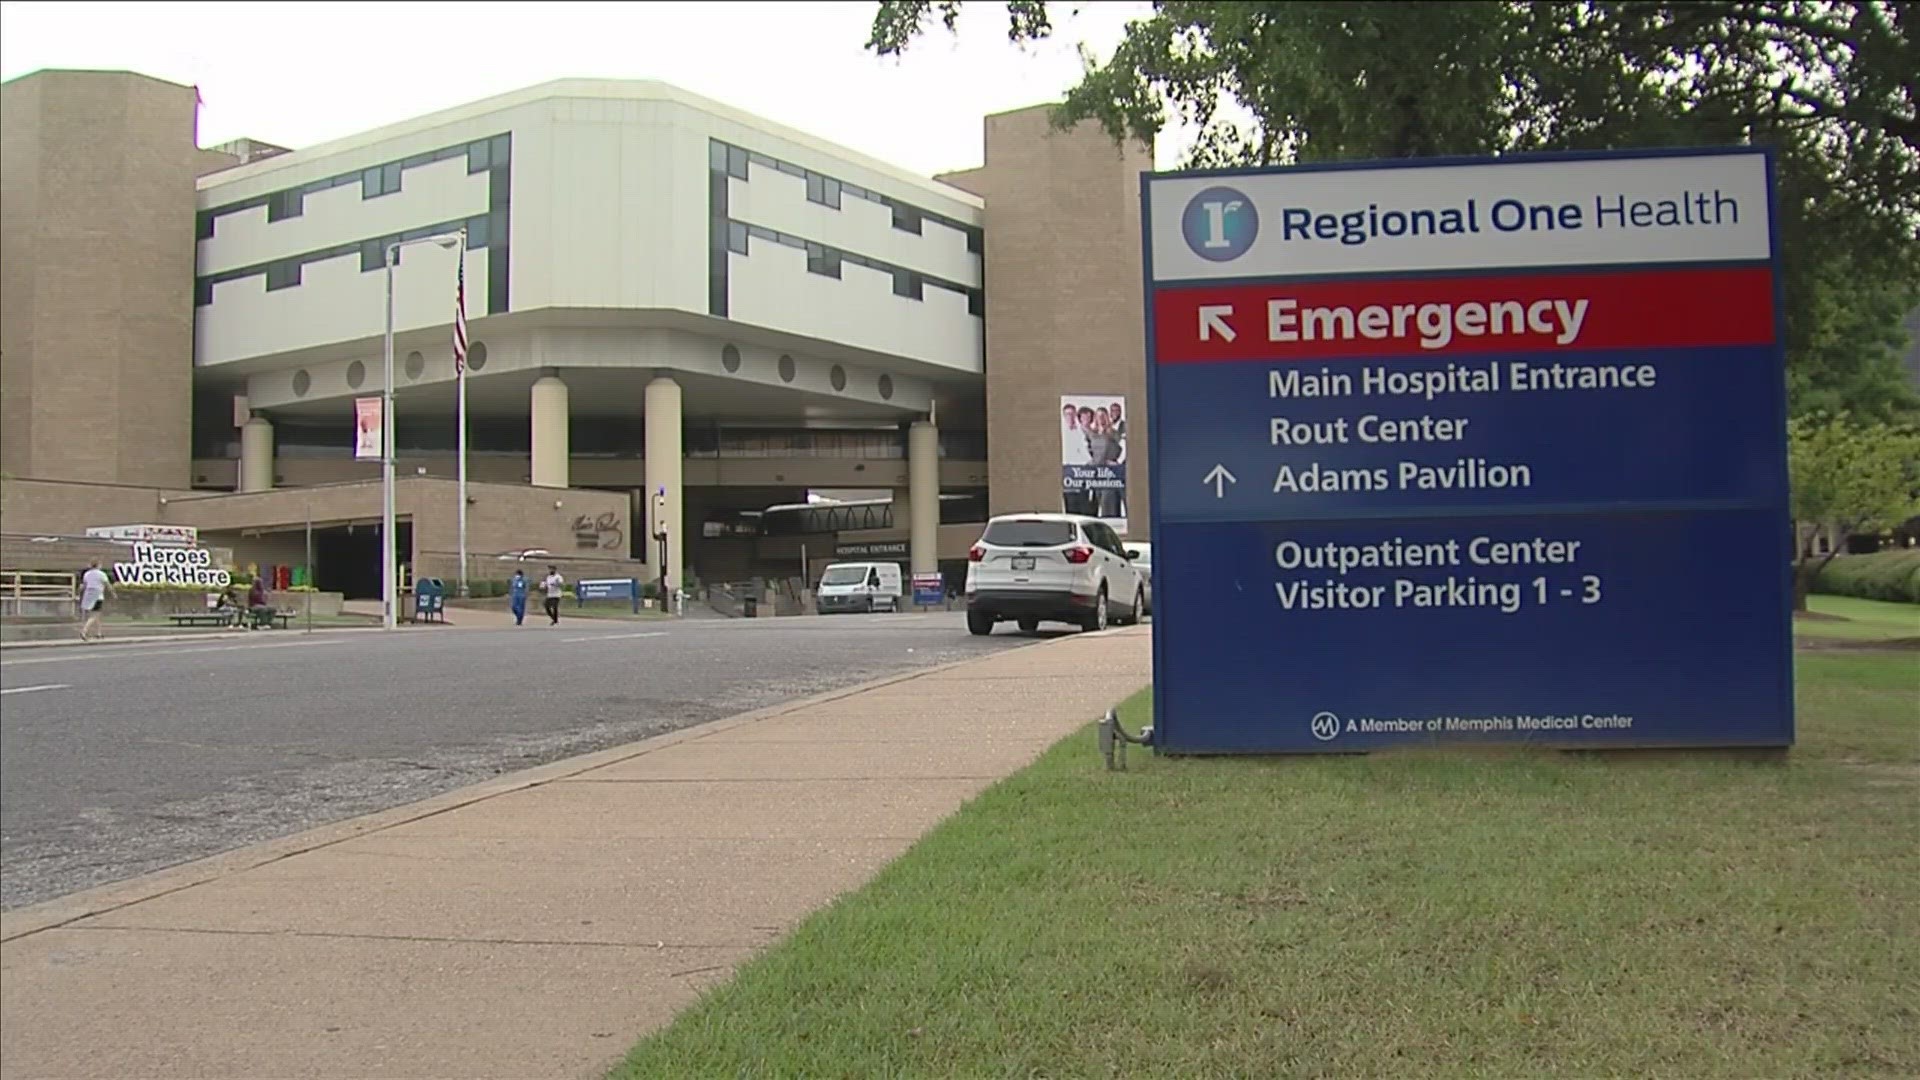 Regional One is the only level one trauma center in the city of Memphis, but it faces serious budget challenges.